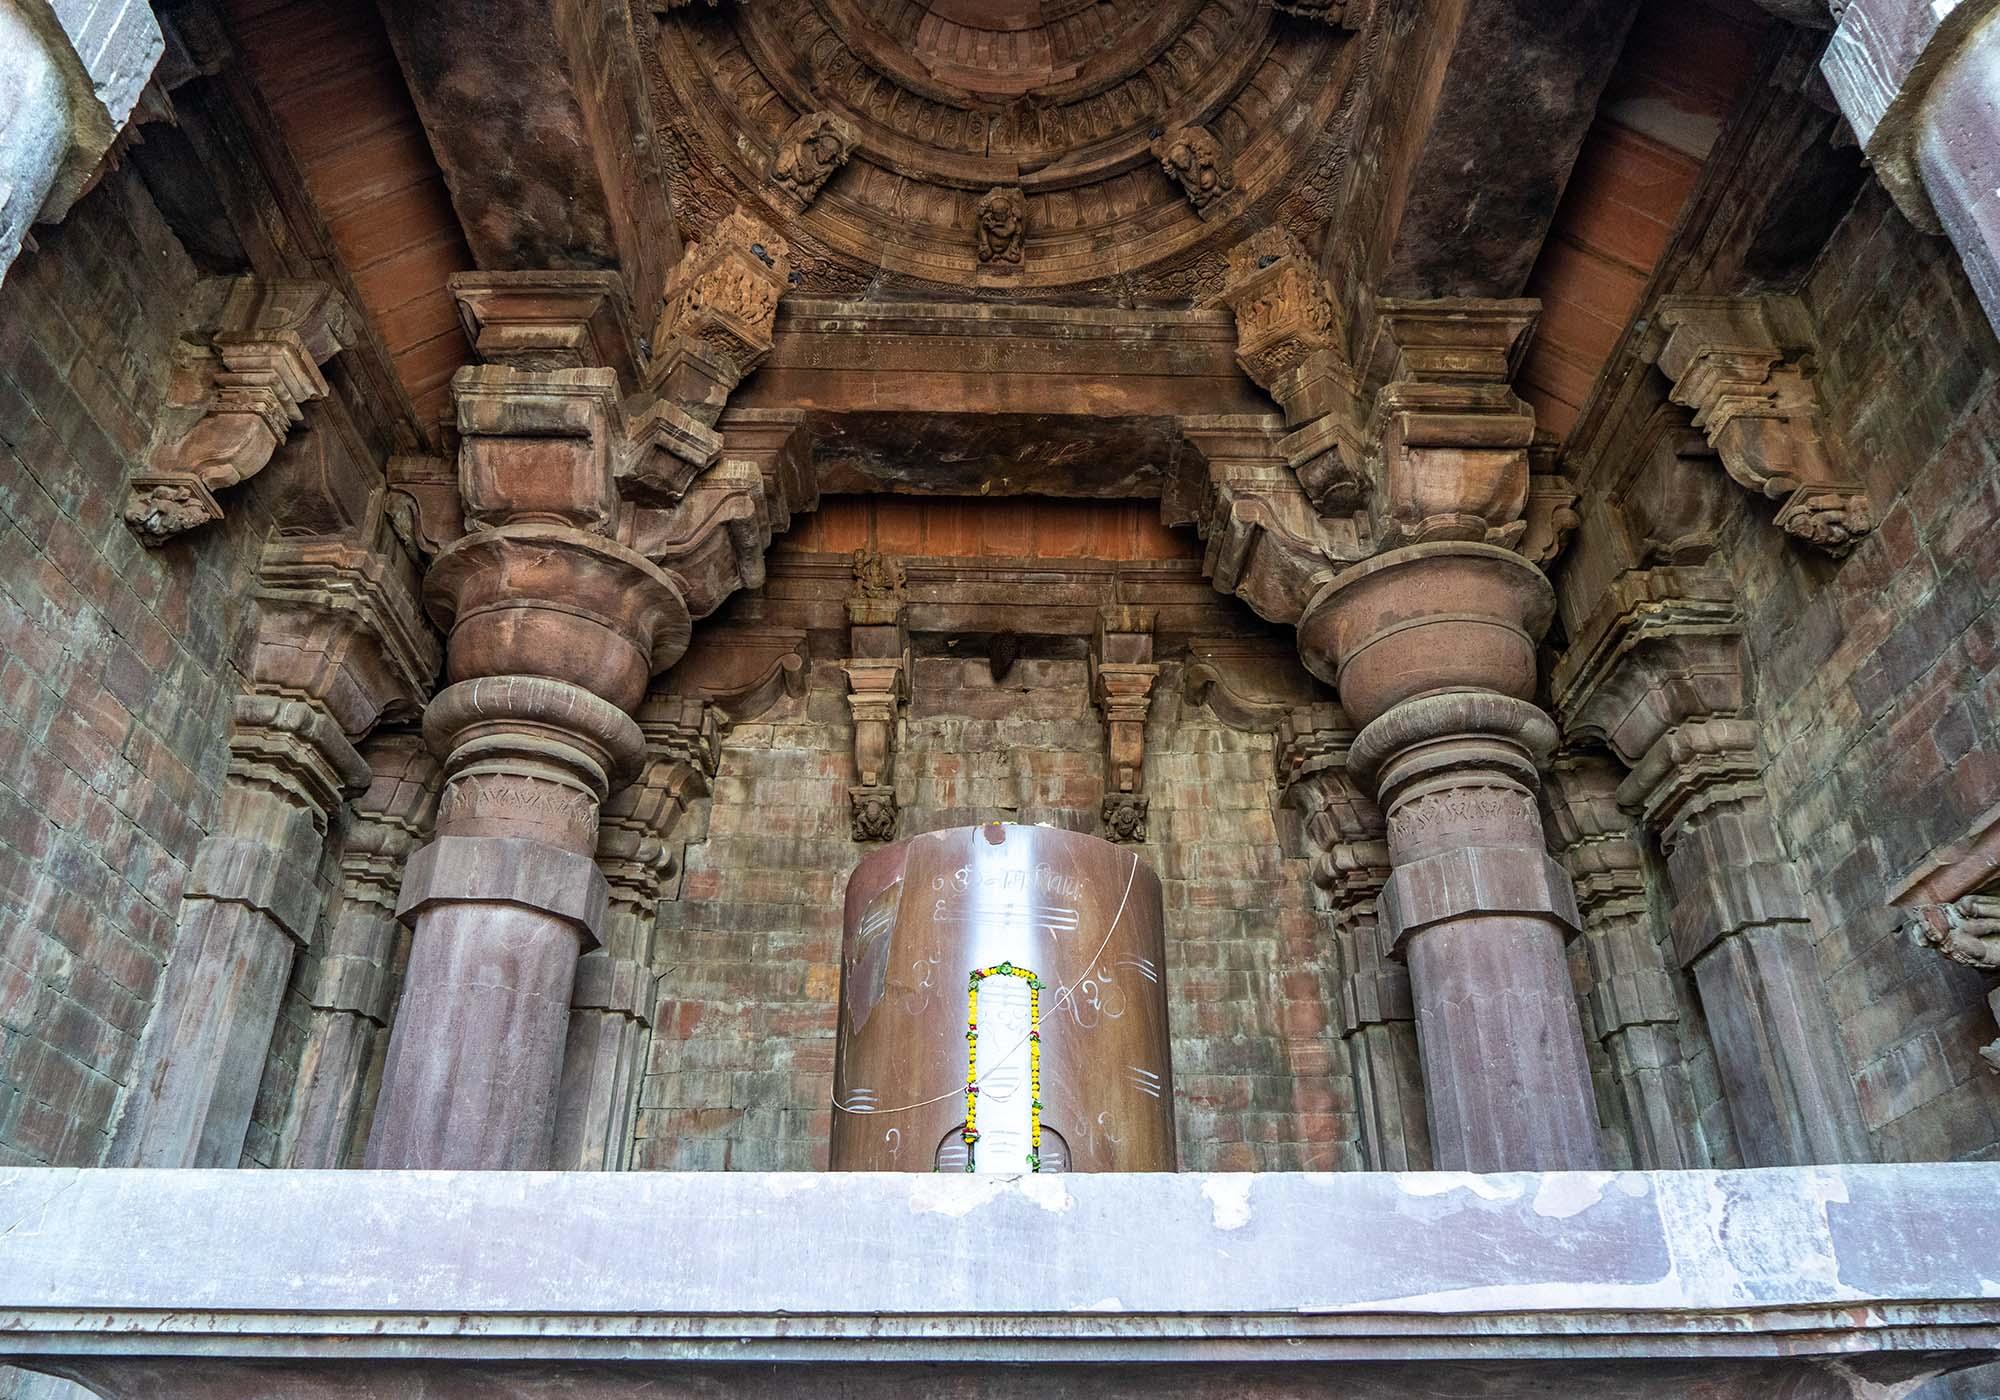 The linga in the middle of the temple with the carved columns and beautifully-decorated ceiling. – © Michael Turtle